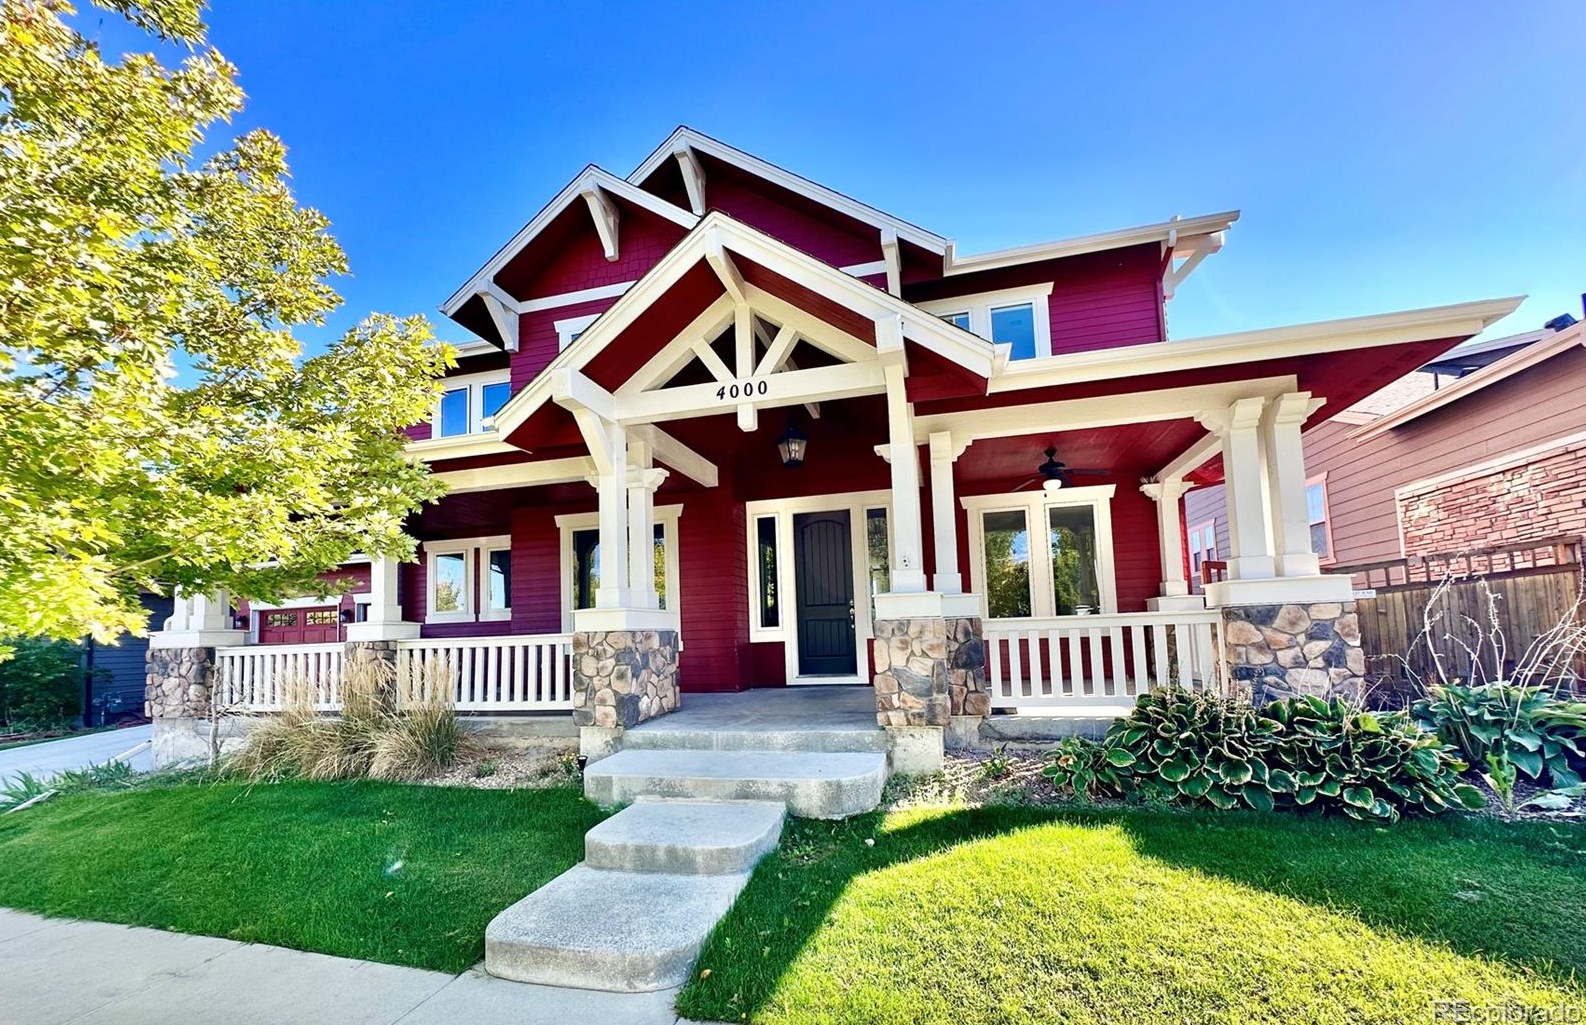 4000 W 116th Way, Westminster, CO 80031